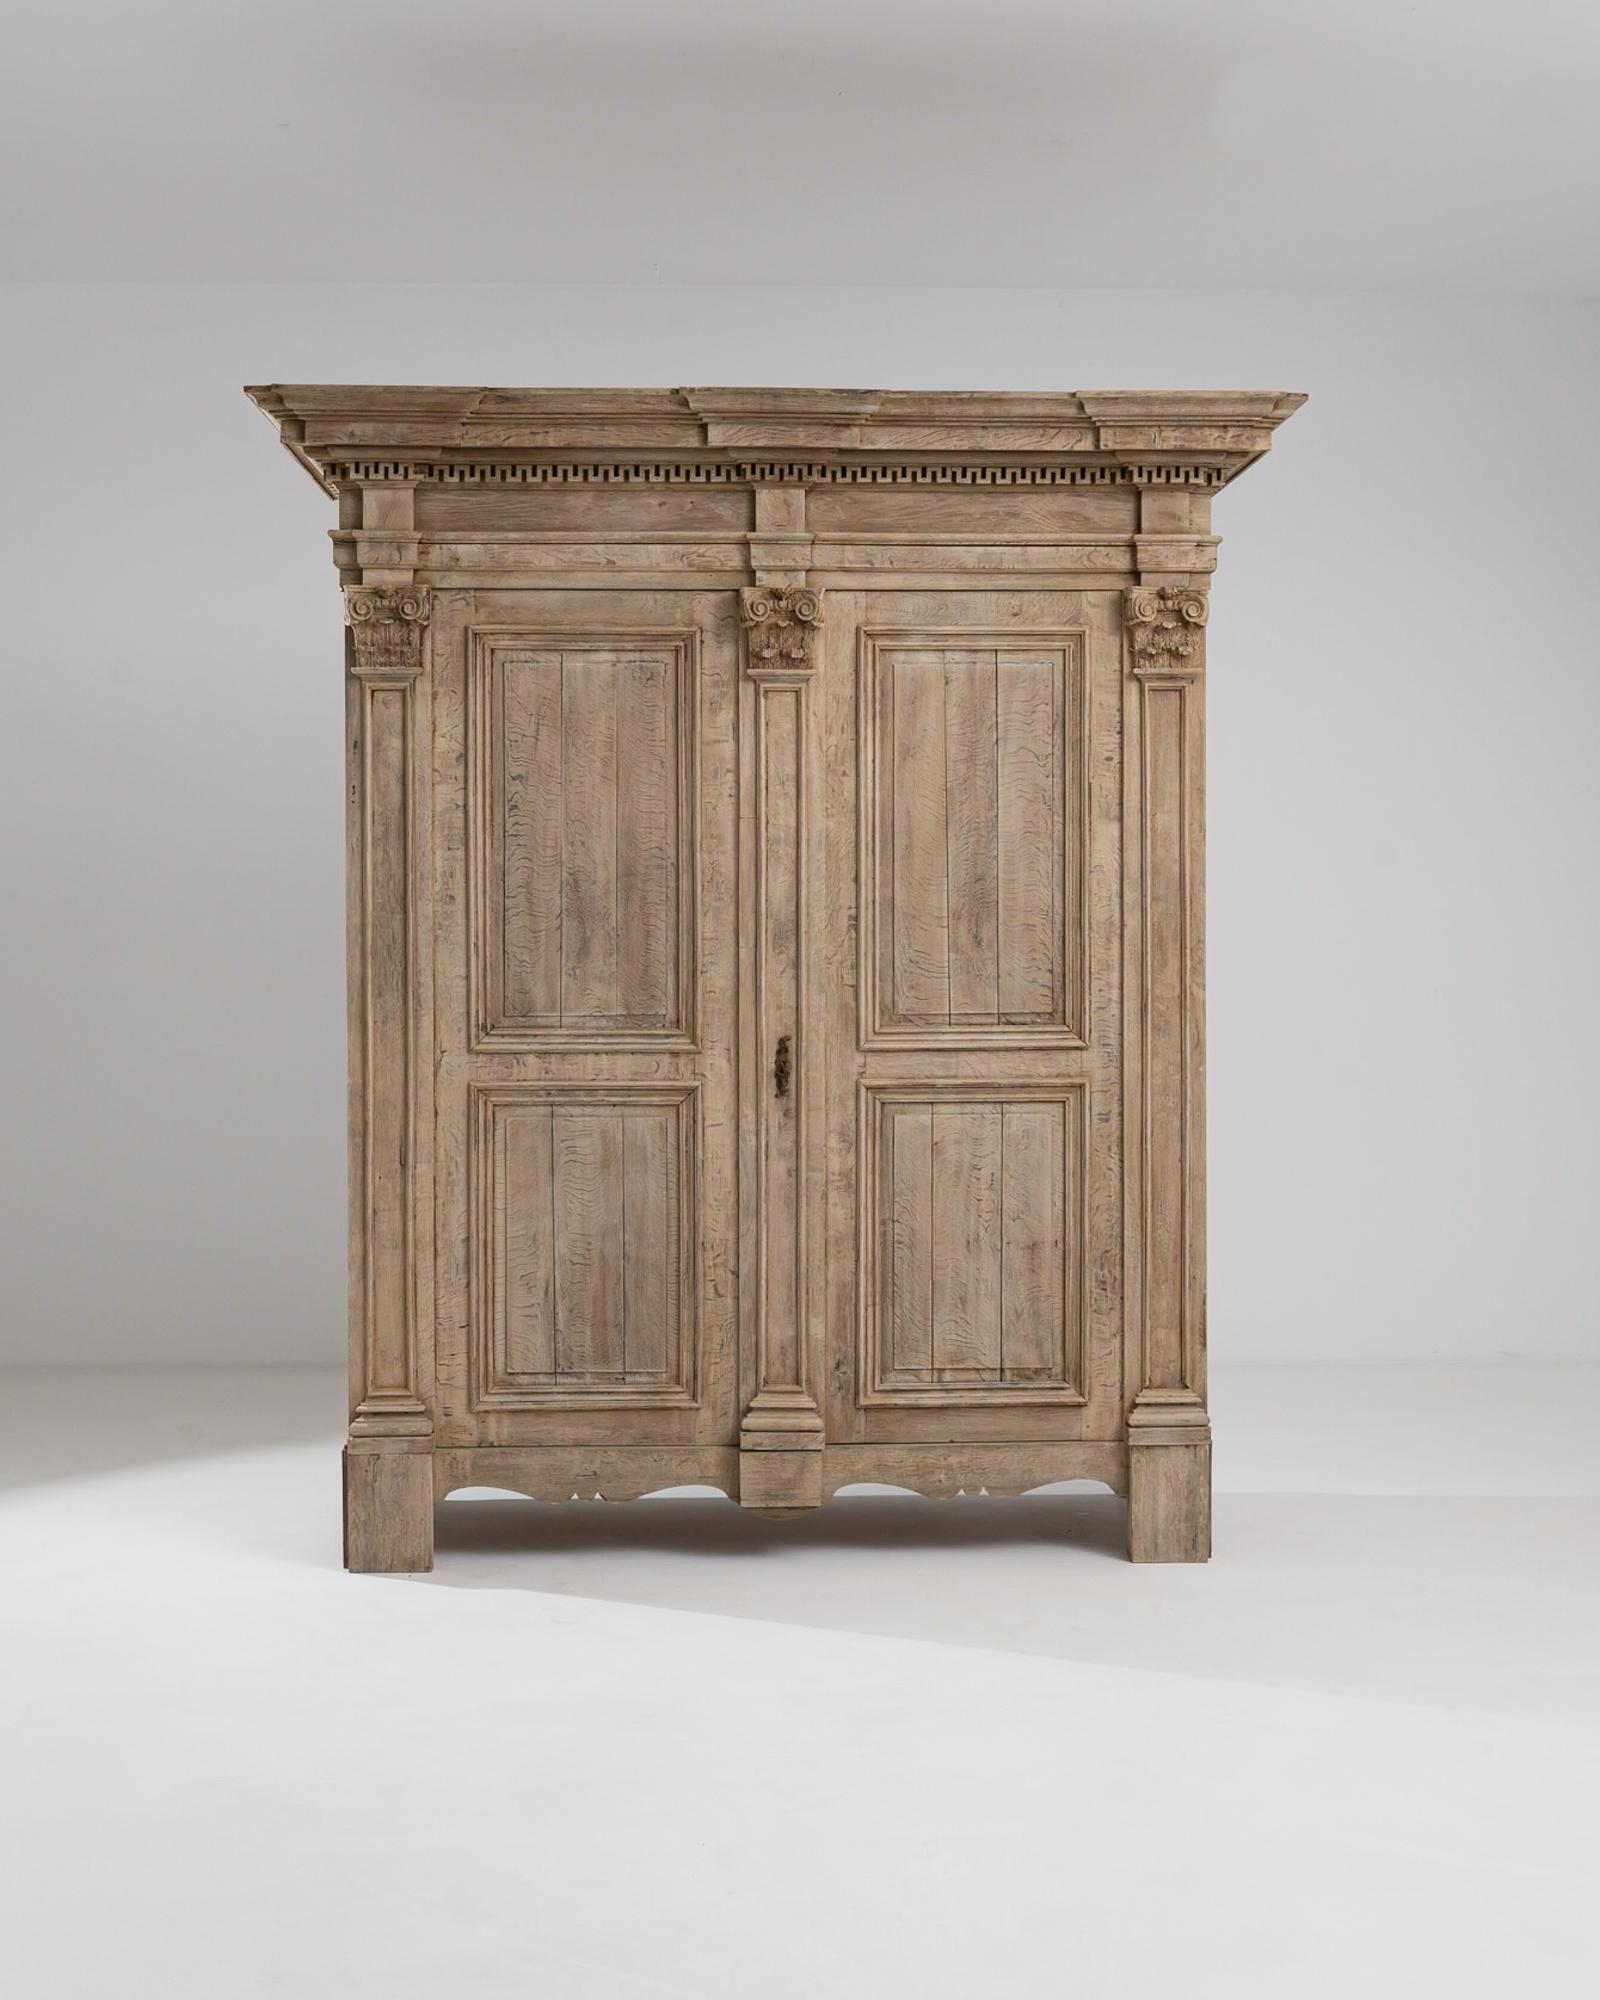 A wooden cabinet from 1880s France. Two hulking doors swing outwards to reveal a vast storage space. The door’s neoclassical columns create a curiously pleasant asymmetry, with wider compartments on the right and narrower on the left. A network of